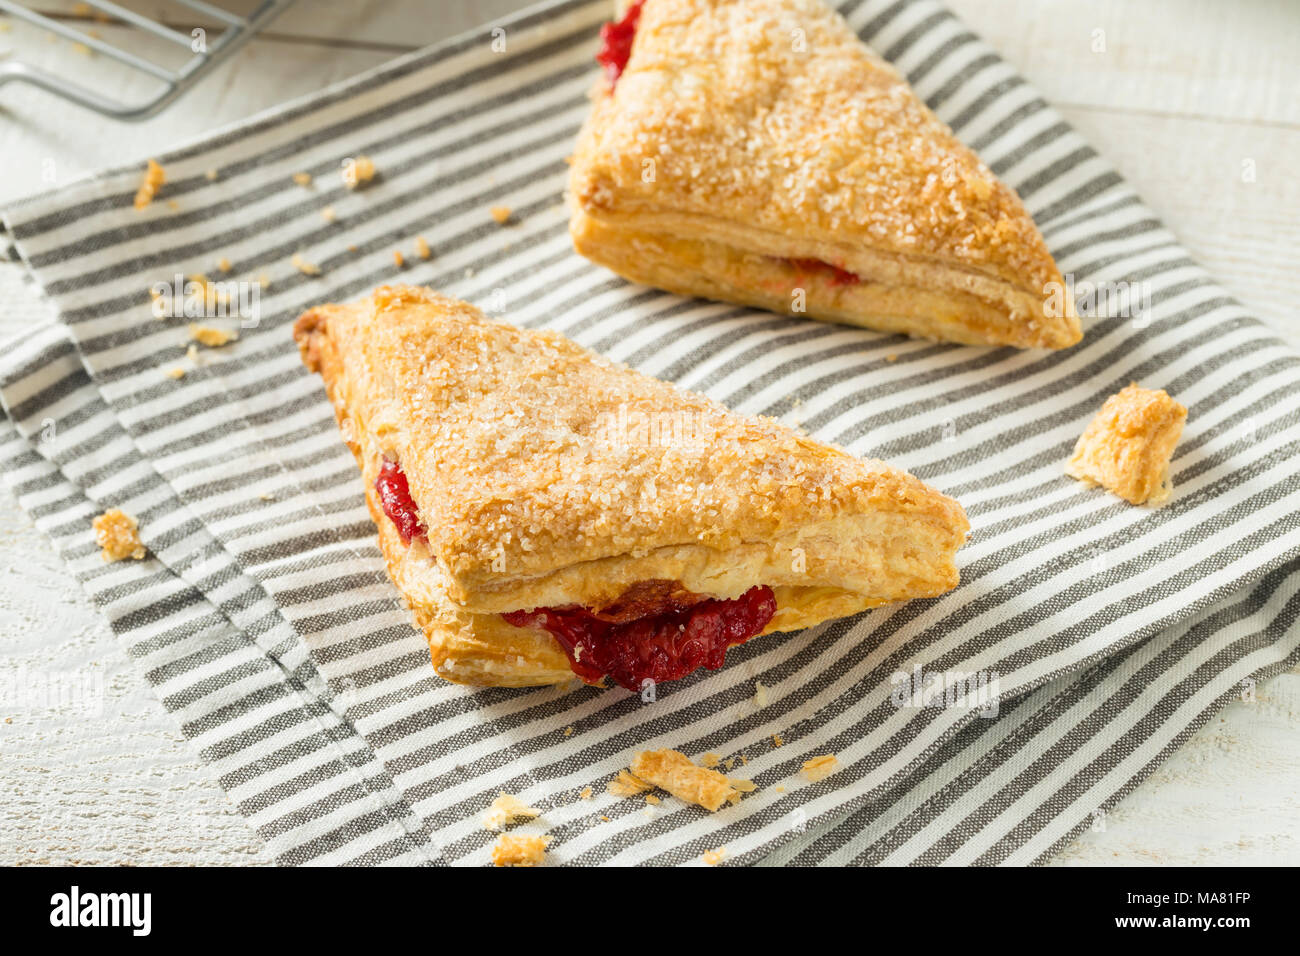 Homemade Cherry Turnover Pastries Ready to Eat Stock Photo